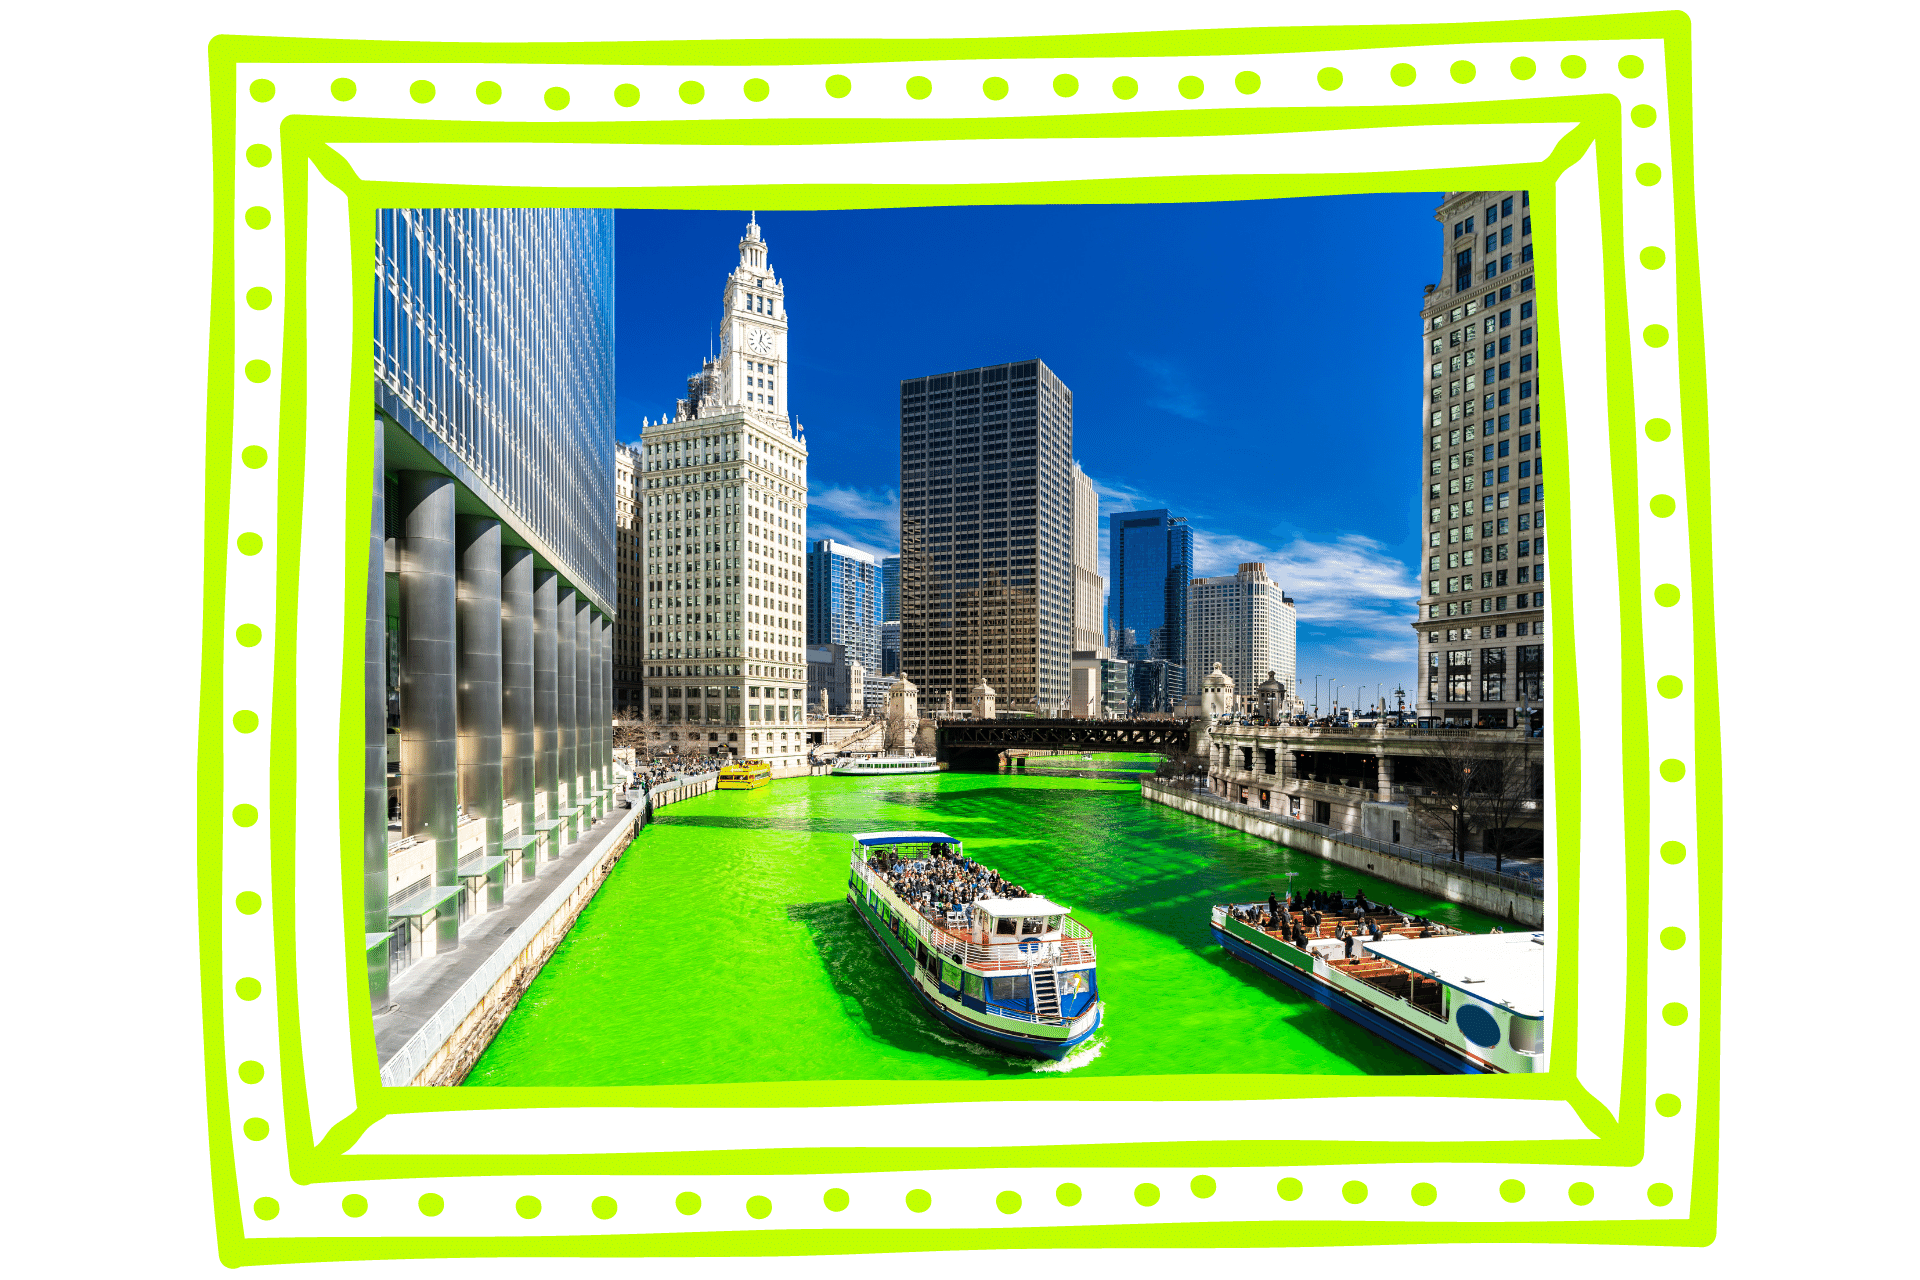 The river in Chicago, turned green for St Patrick's Day celebrations. A river boat full with people cruises through it.